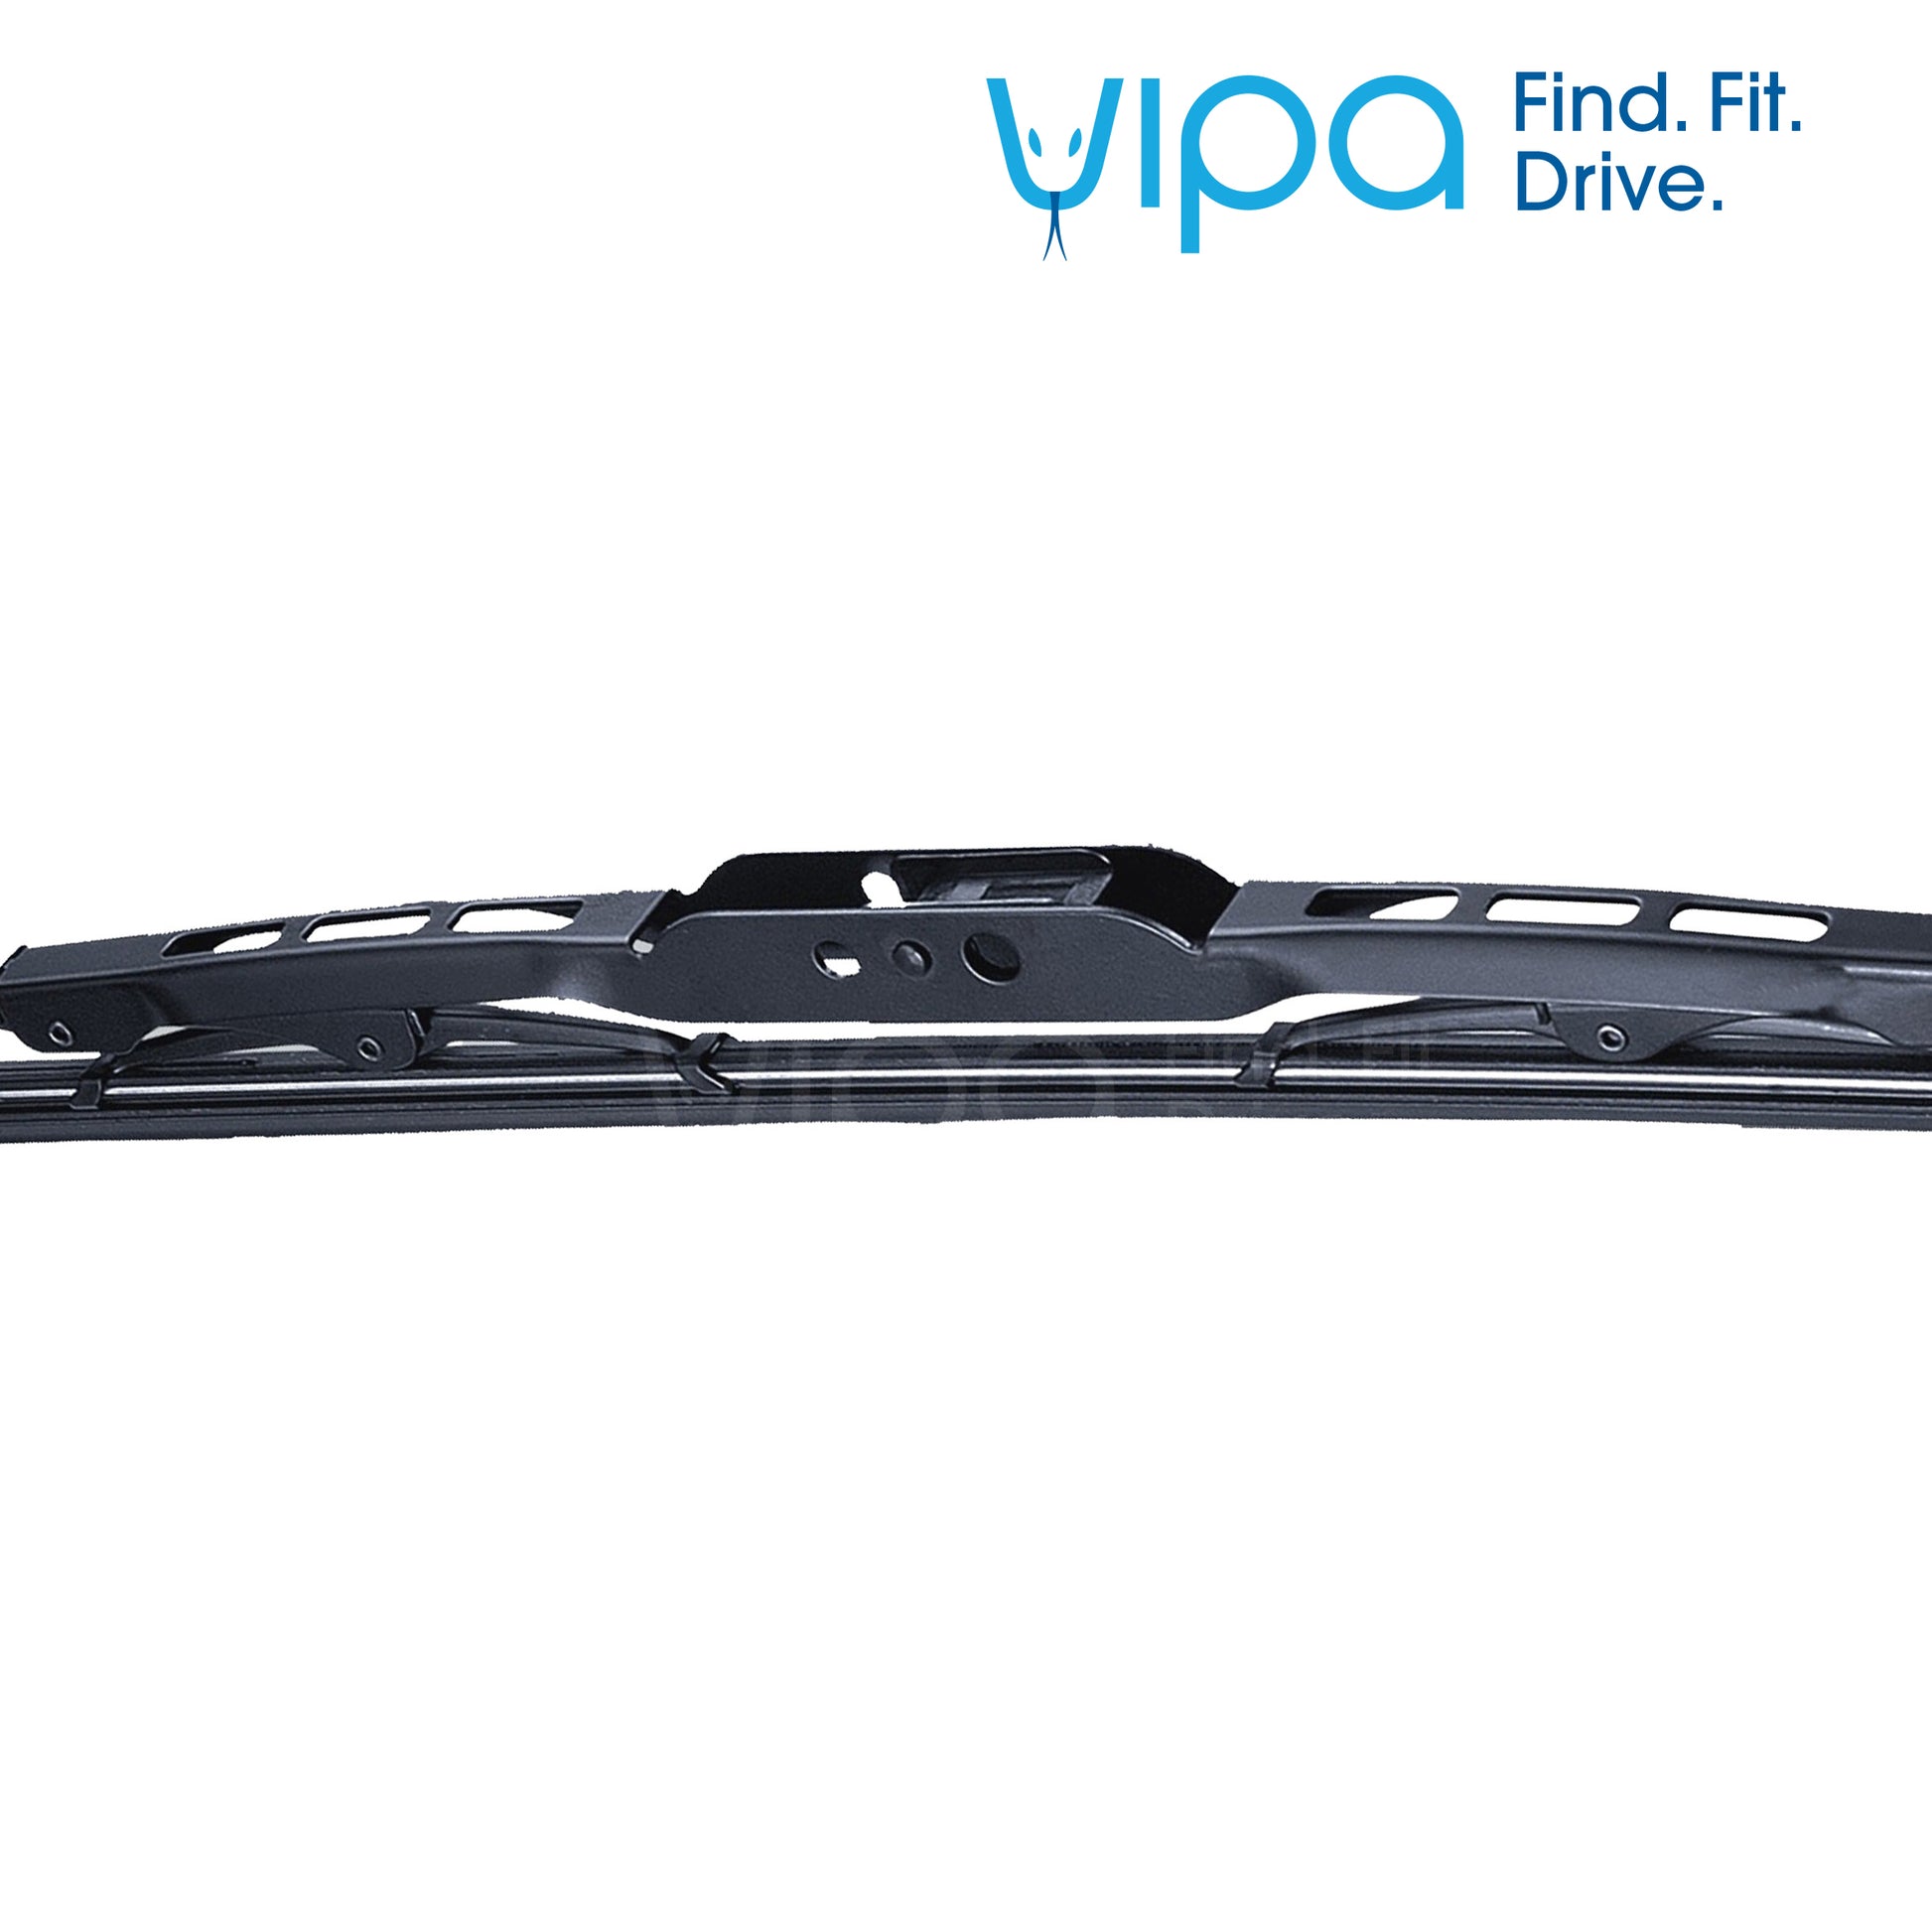 PEUGEOT BOXER Chassis Cab Mar 1994 to May 2006 Wiper Blade Kit